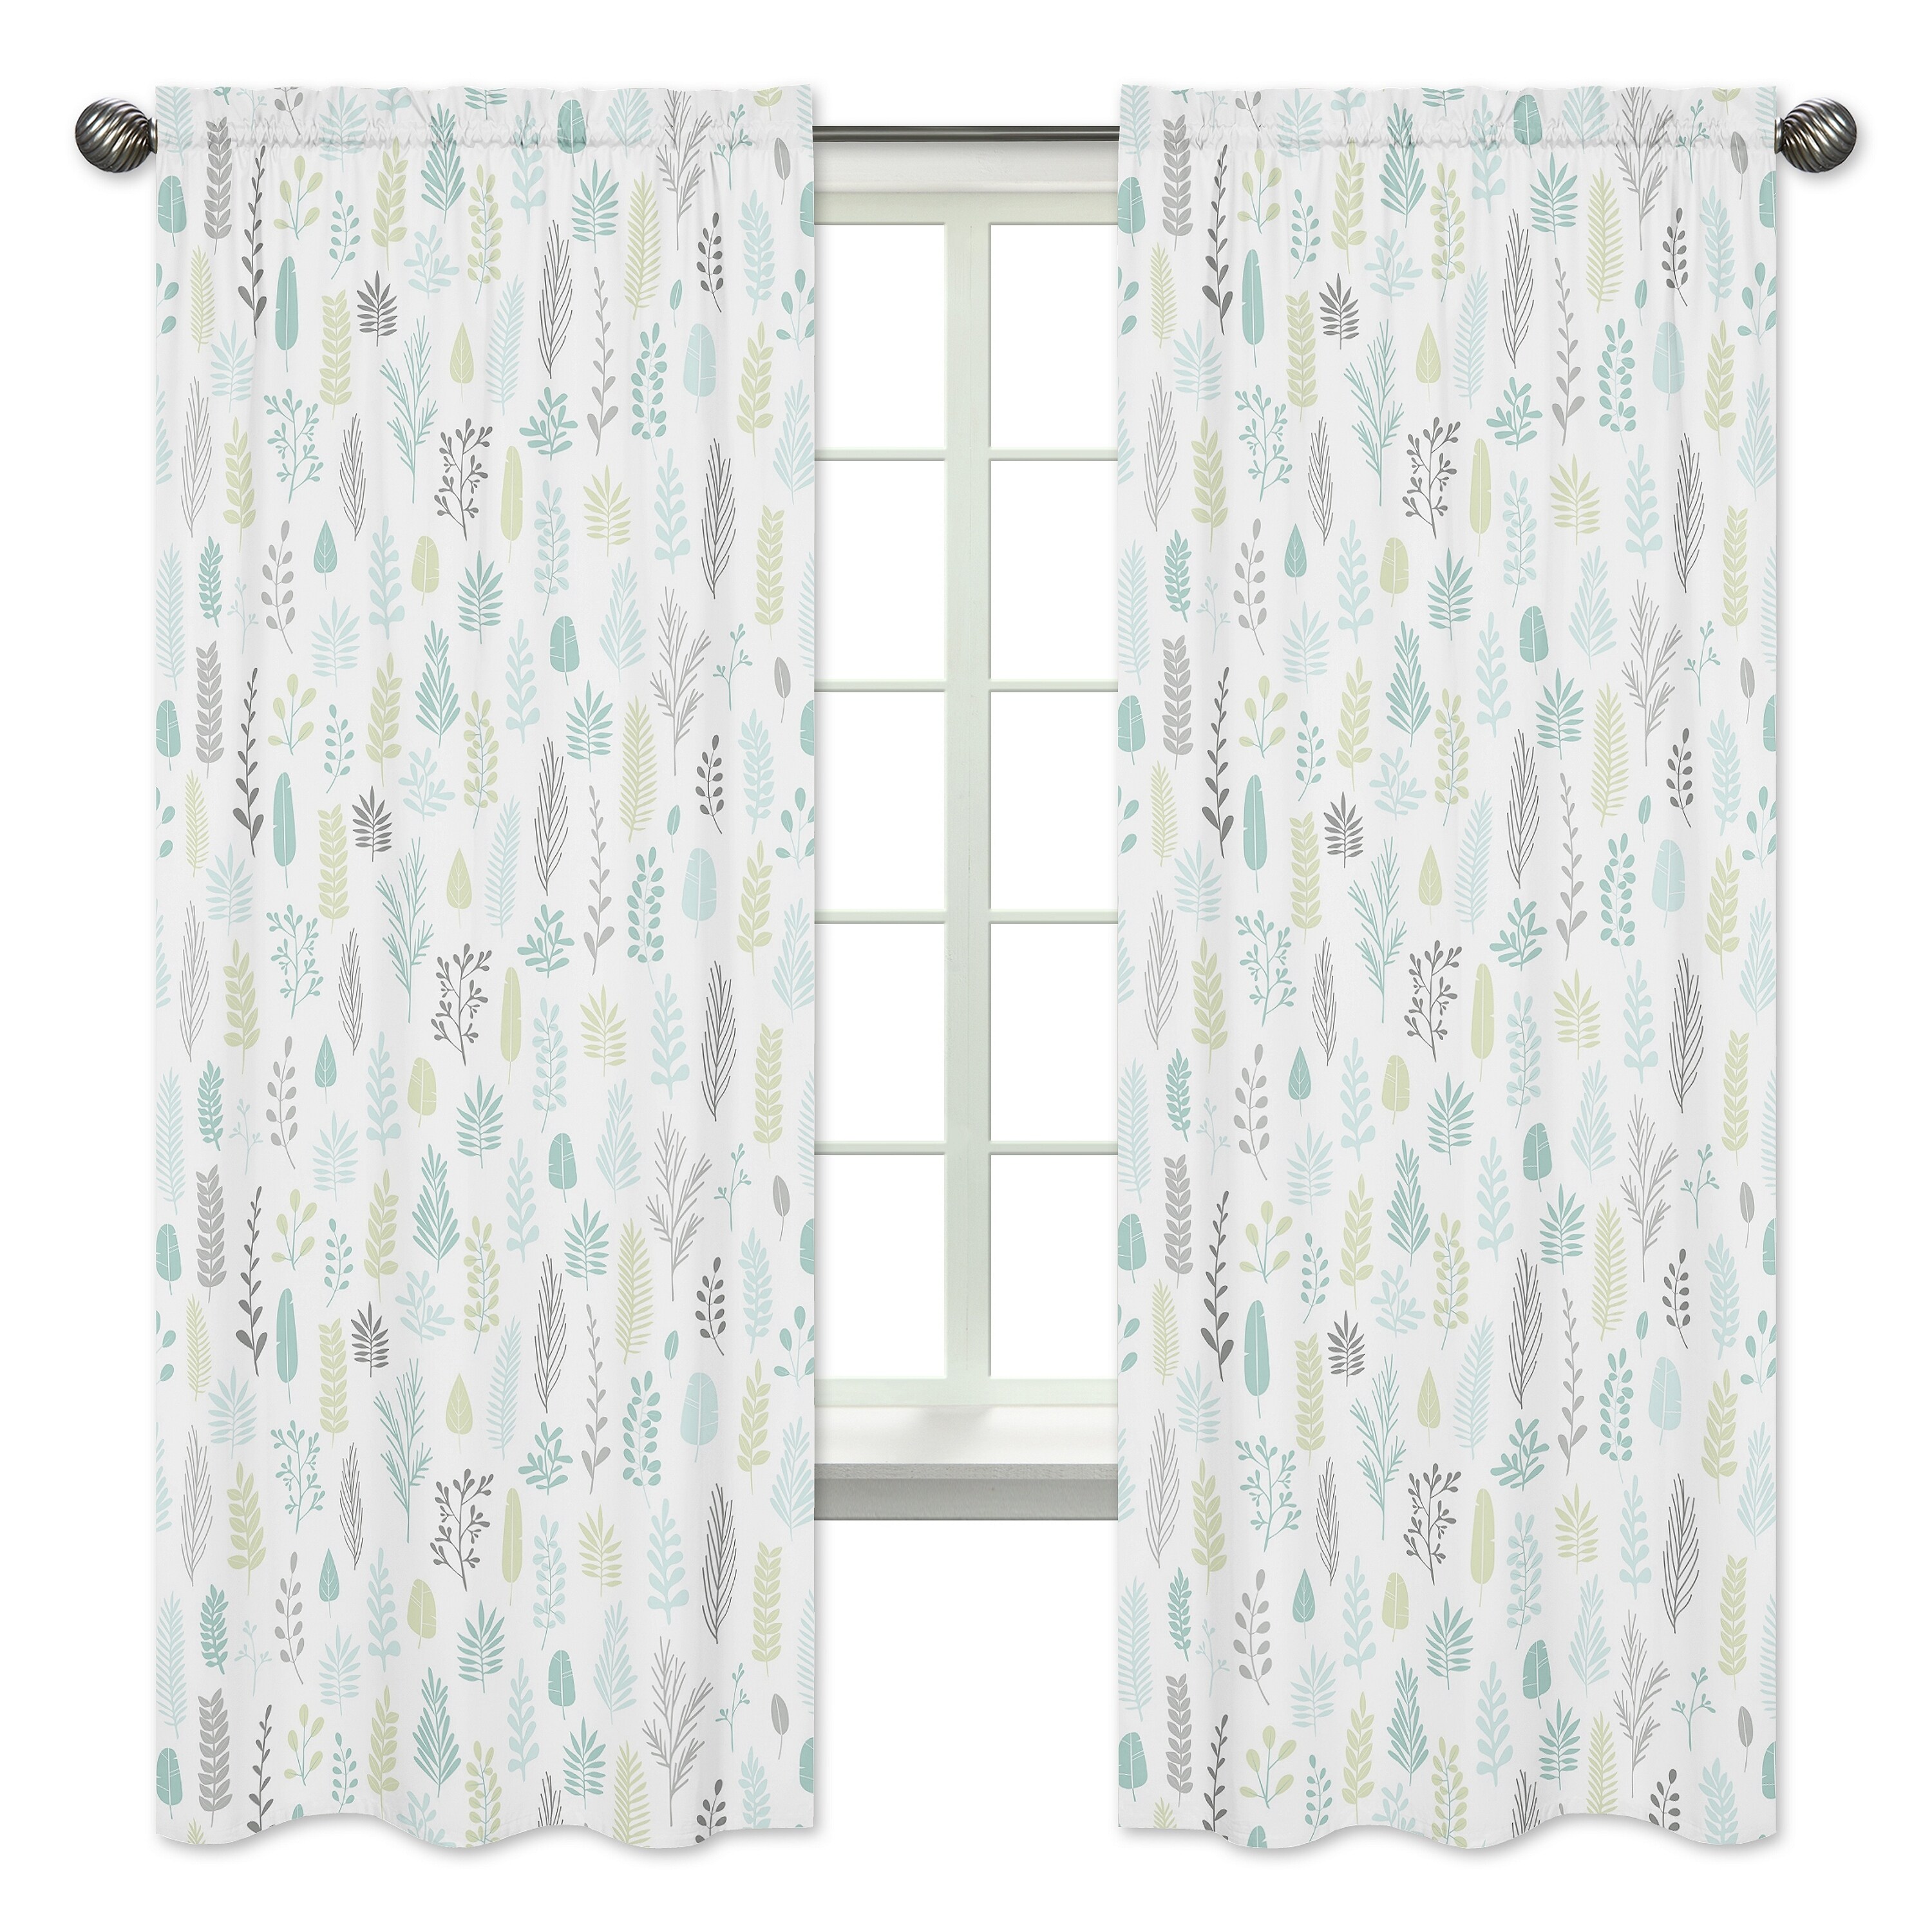 Green White Botanical Floral Leaf Window Treatment Panels Curtains by Sweet Jojo 